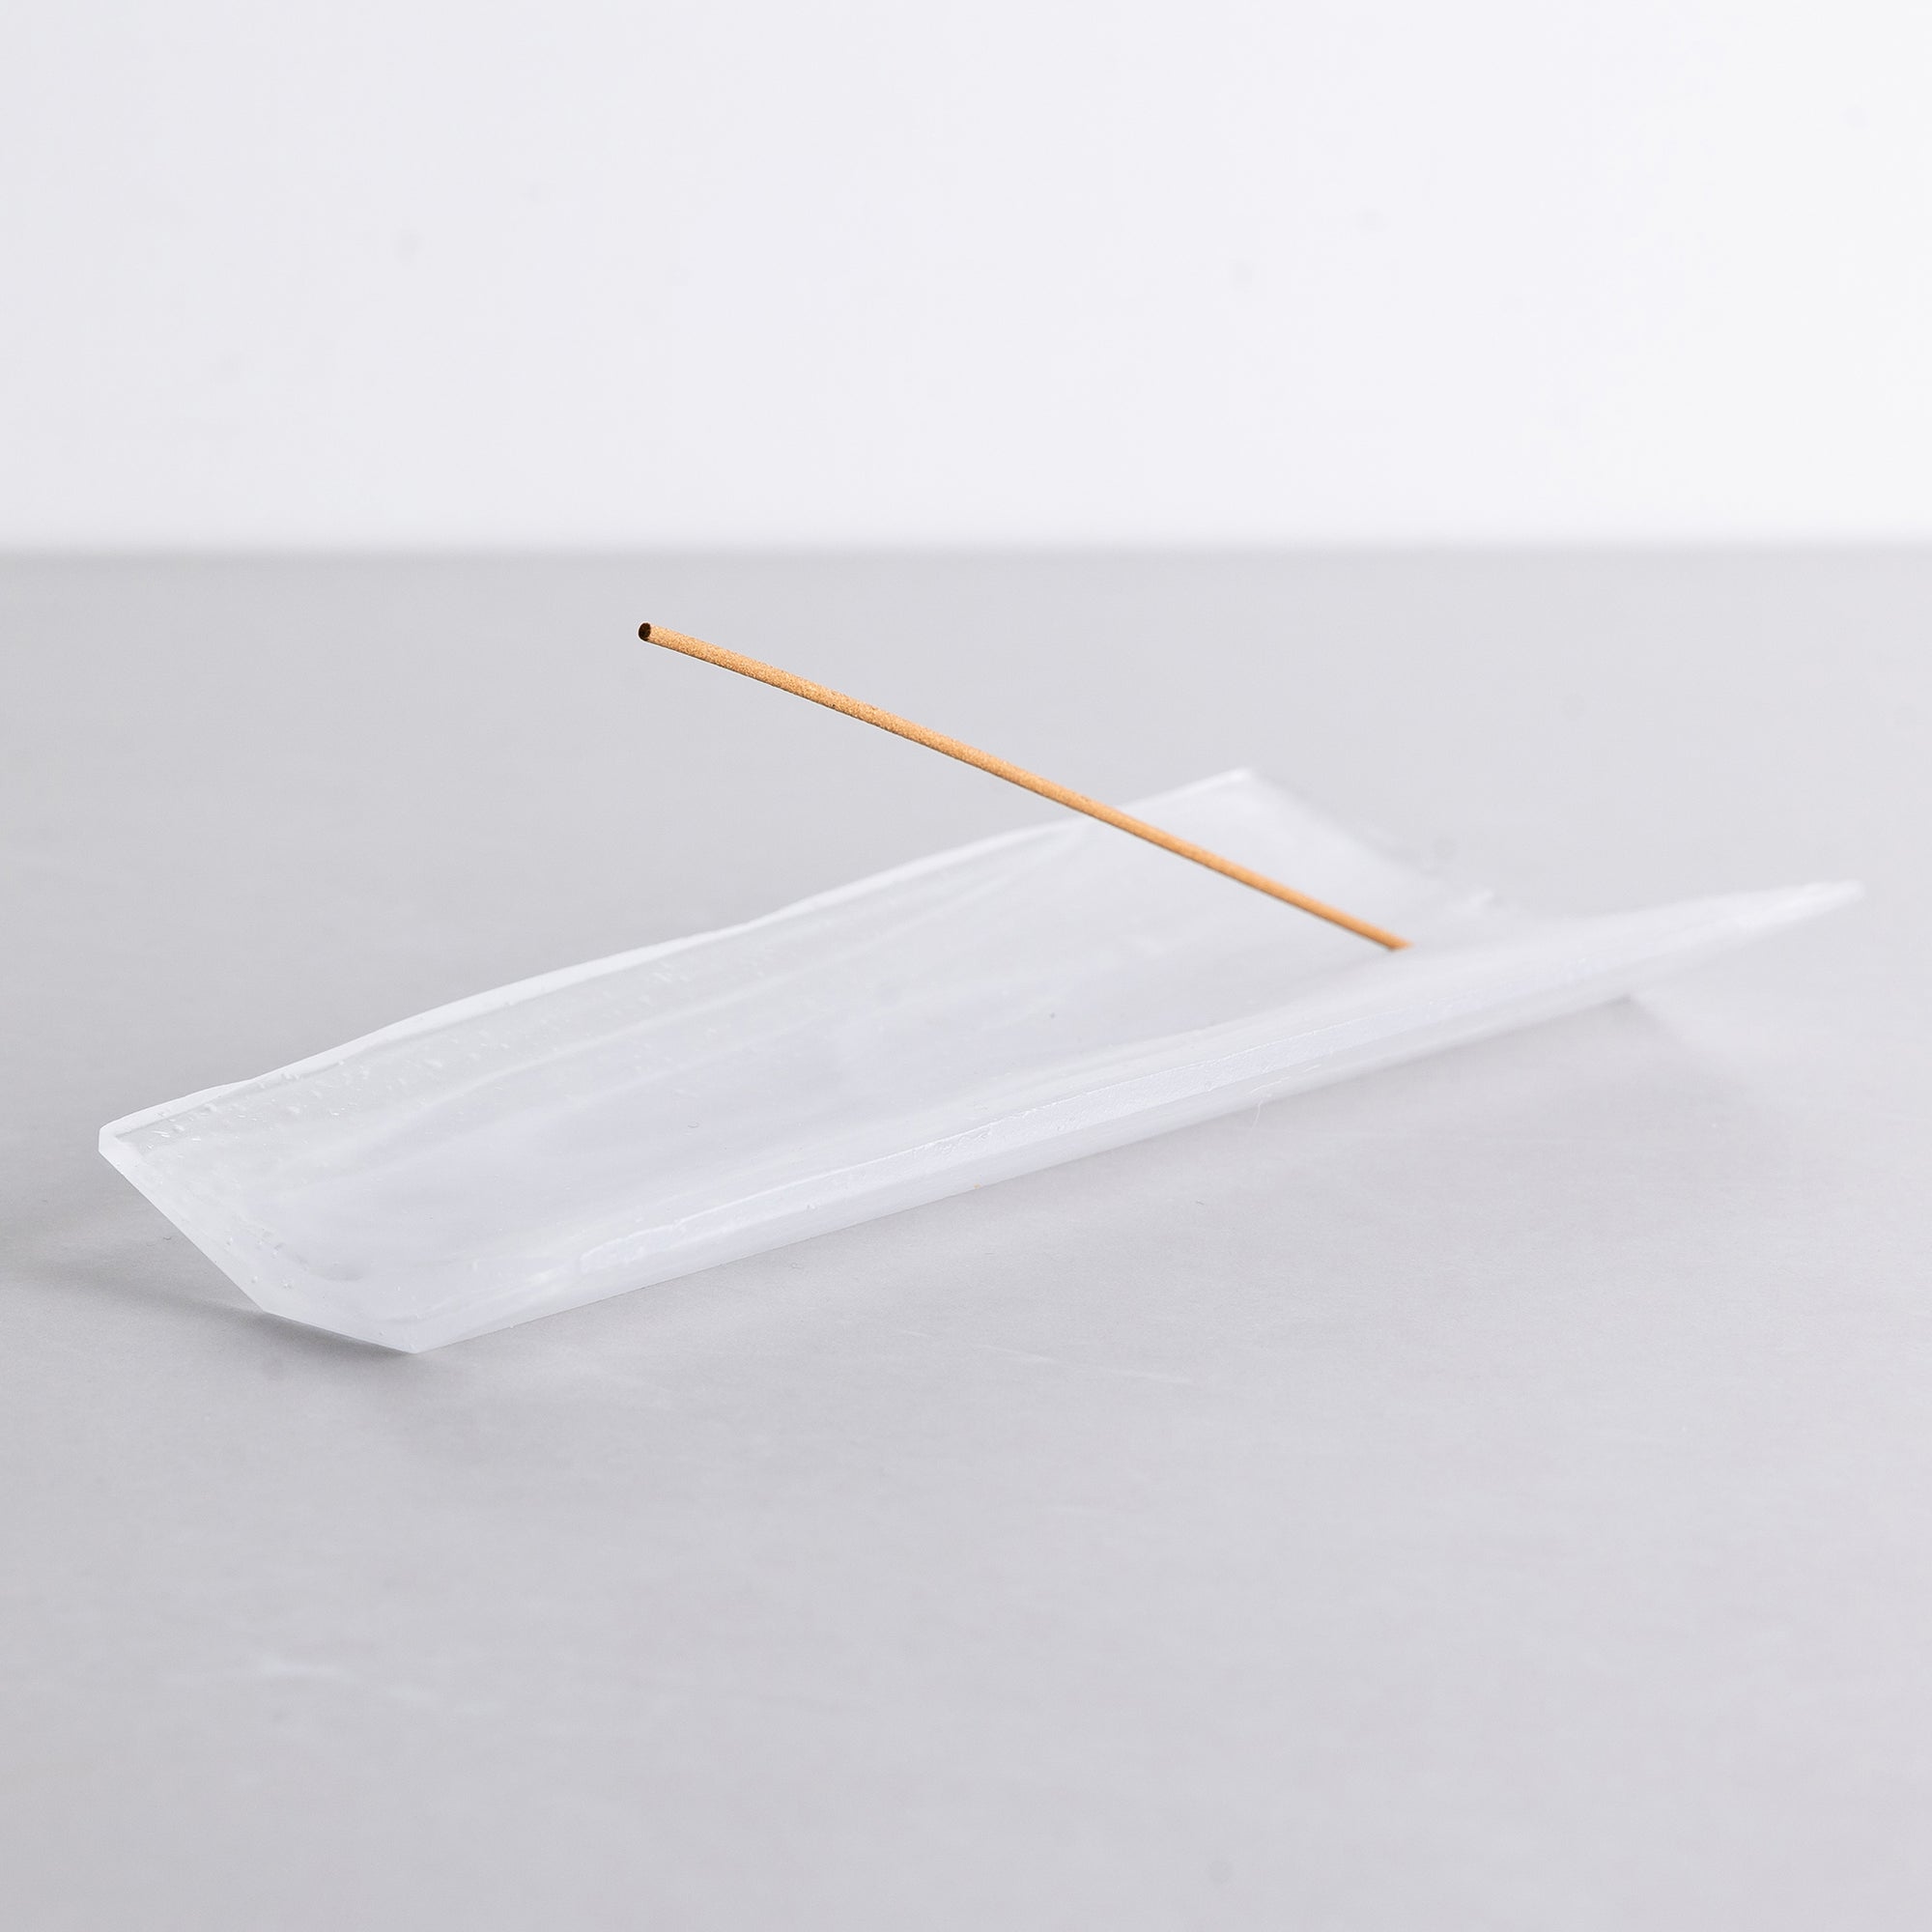 Kin Object's liuli glass incense holder with wood grain patterns on a black table